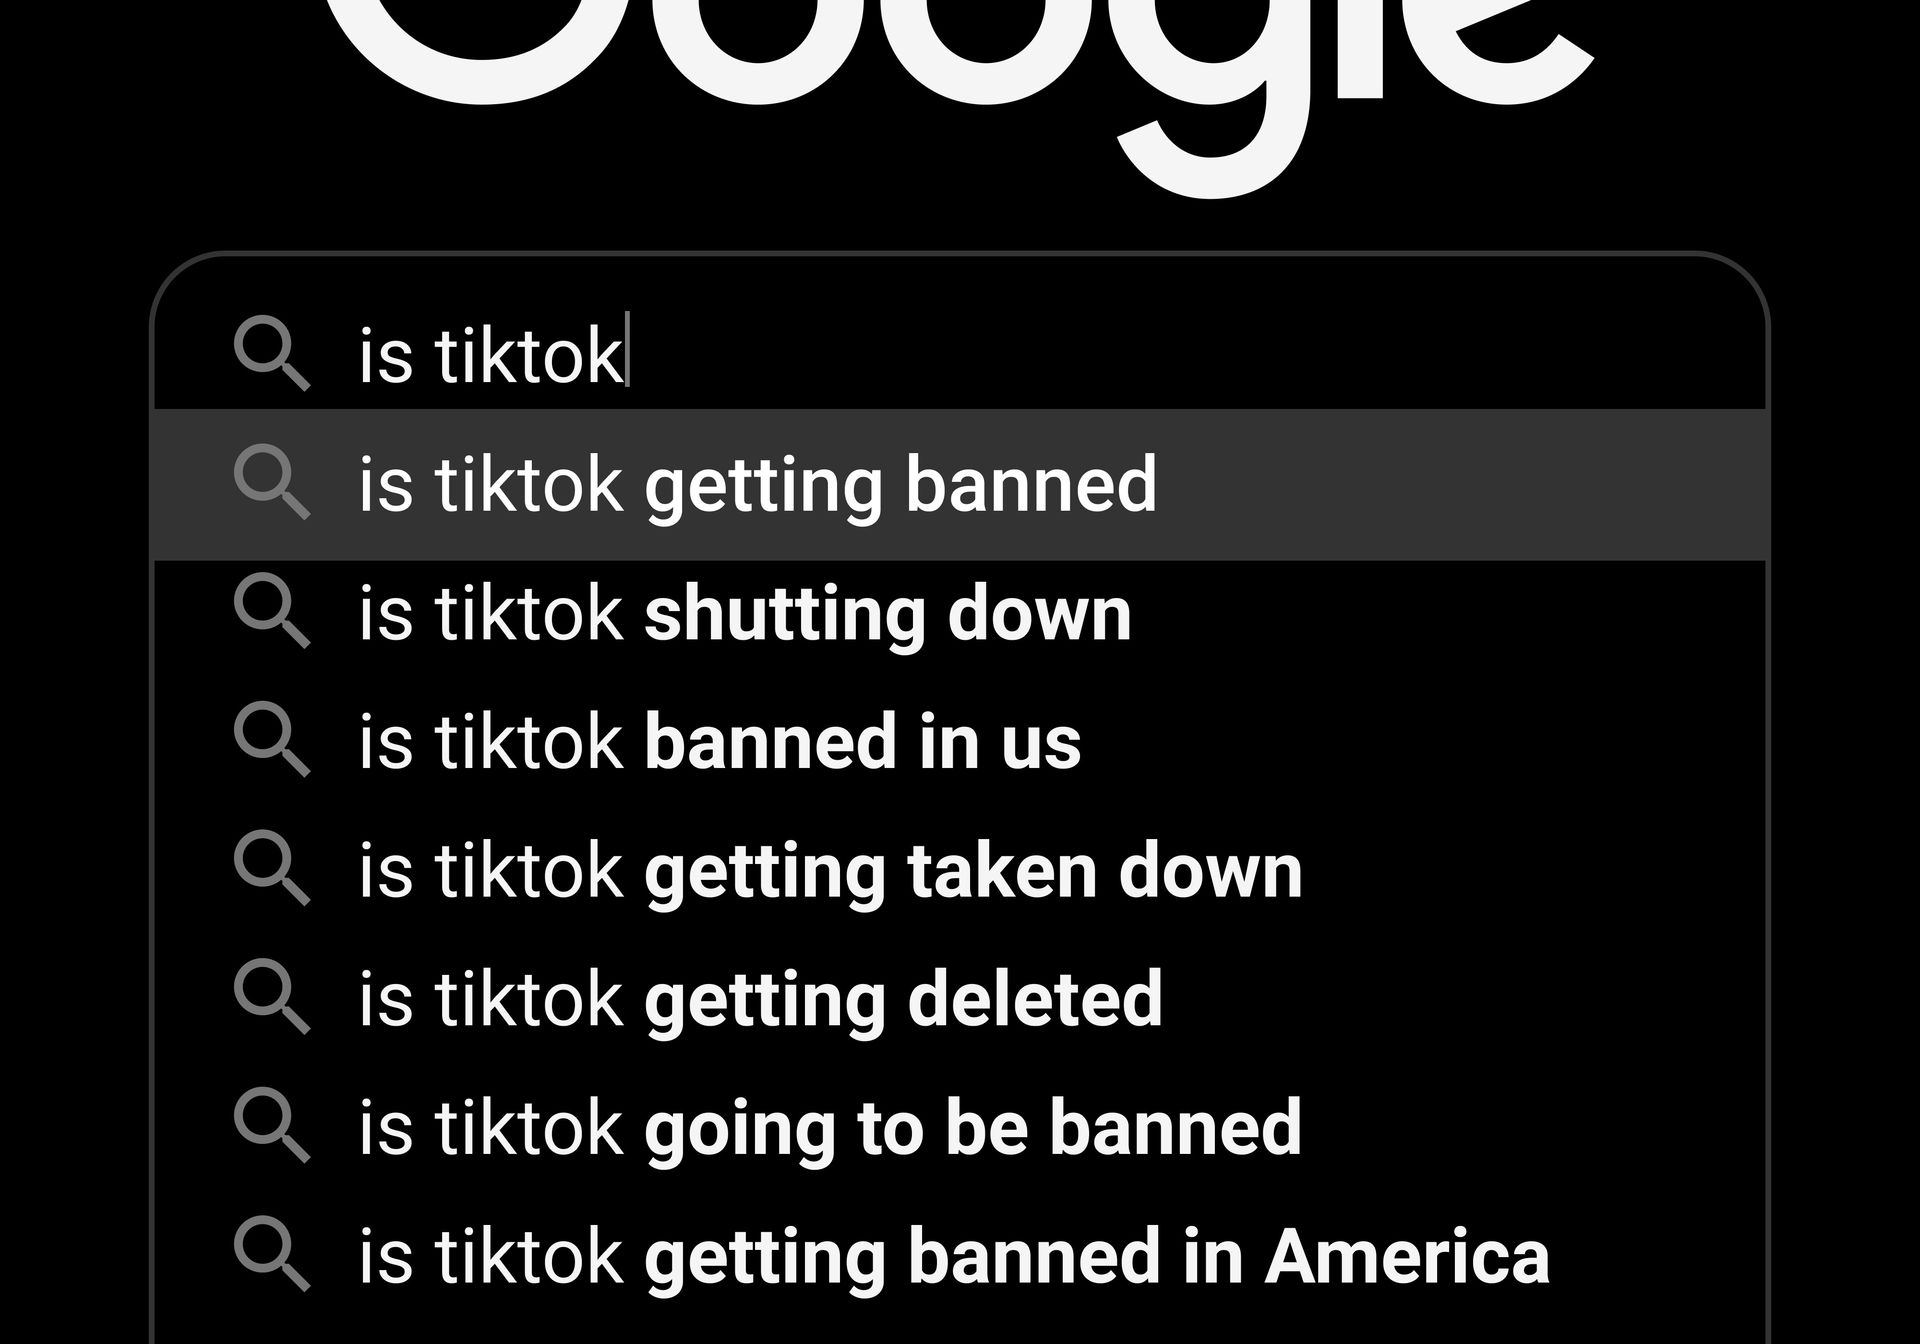 This bill could cause TikTok to ban